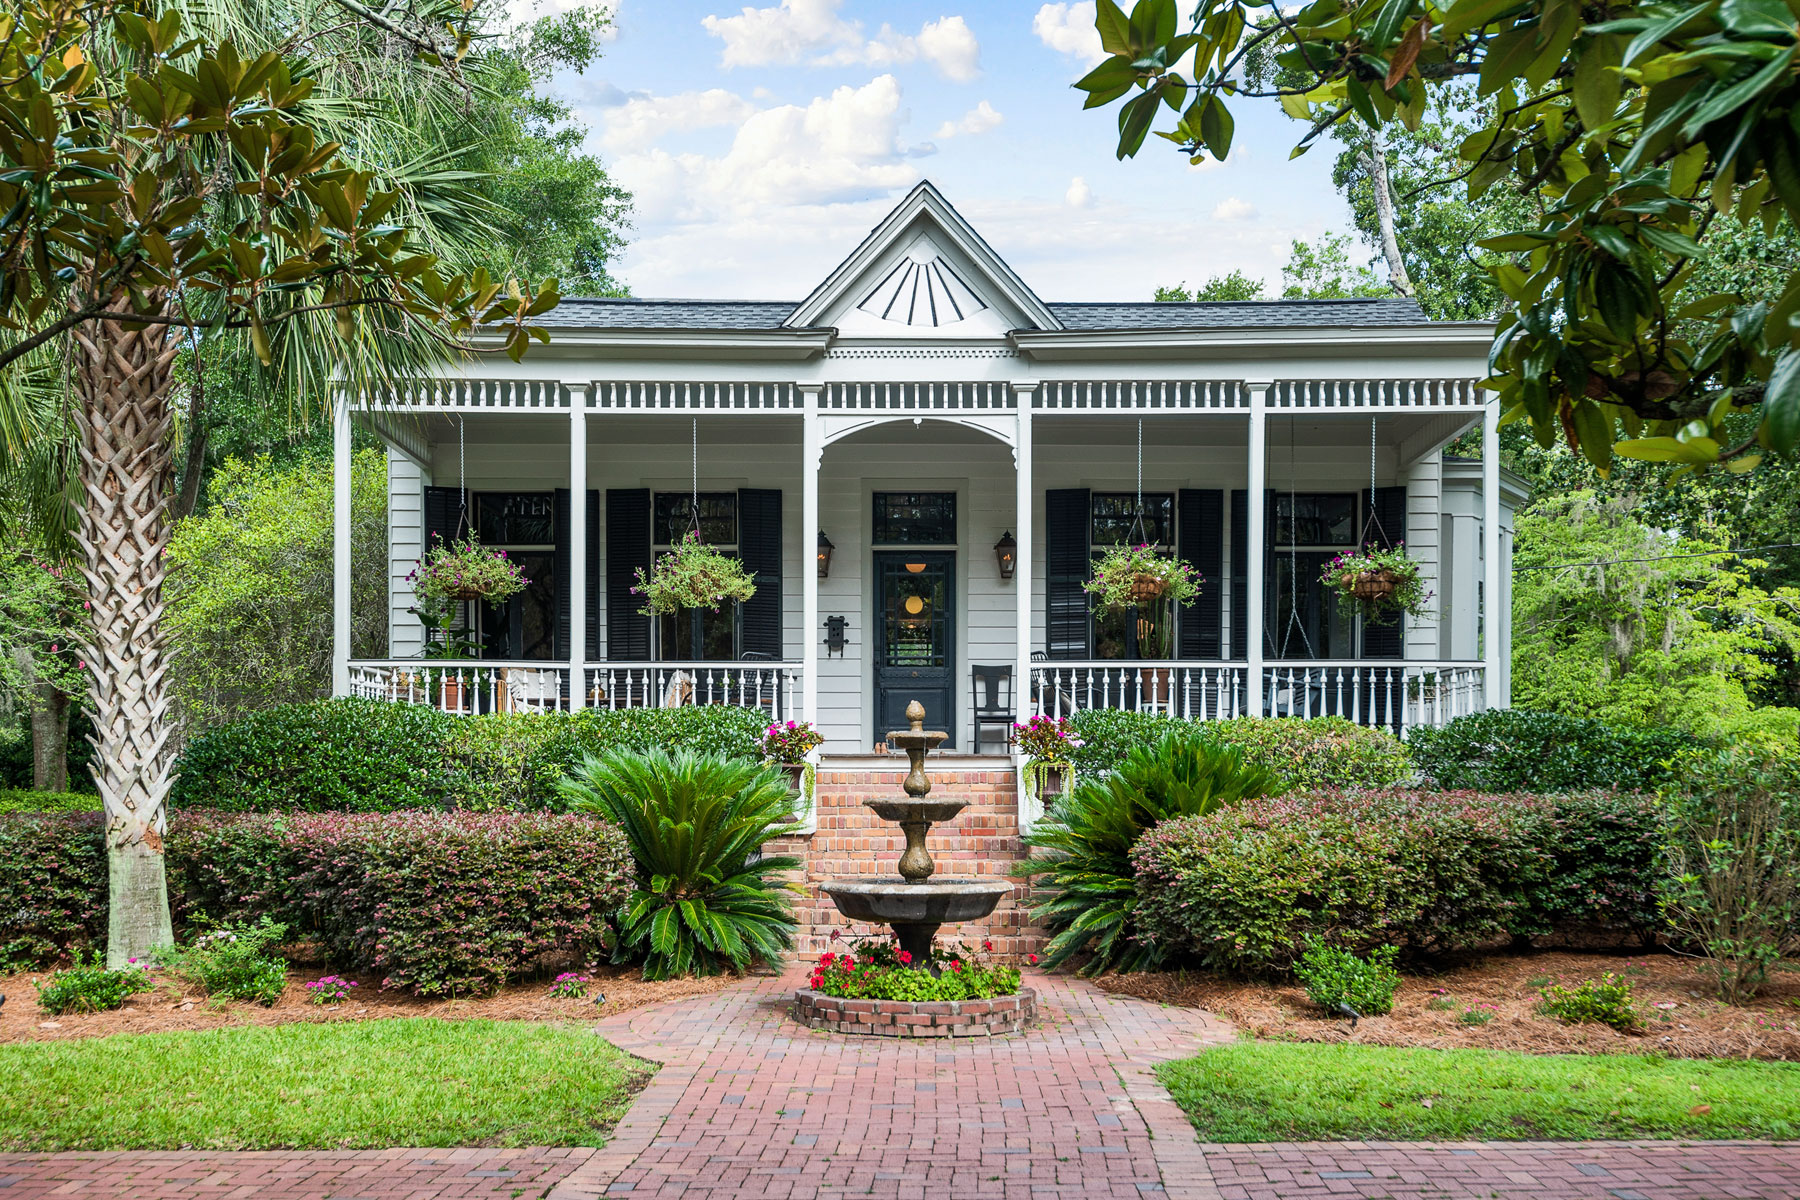 Wholehouse renovation of historic home in Summerville, SC